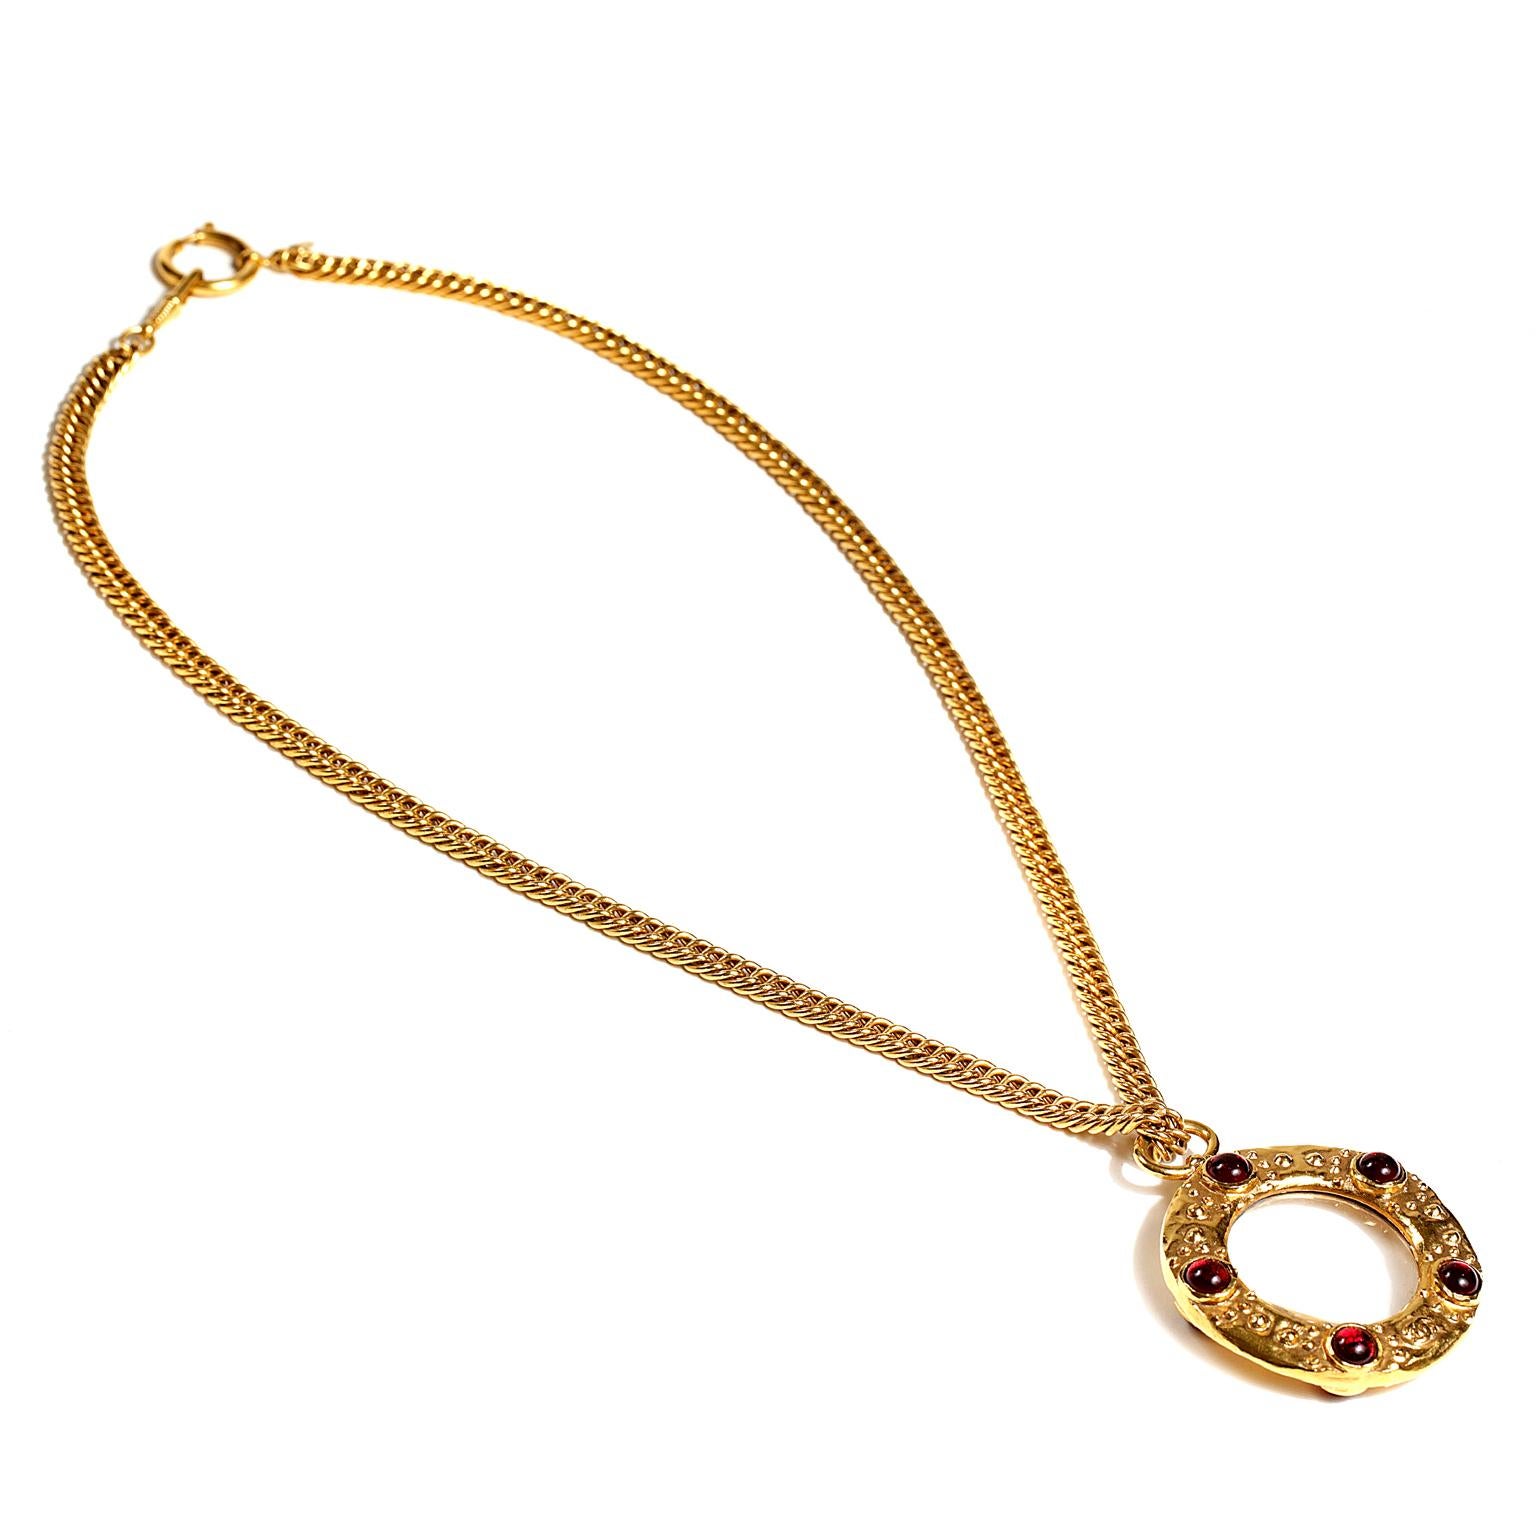 Chanel Gripoix Monocle Necklace - excellent condition
  A rare piece from the 1980’s, it is brilliant addition to any collection. 
Gold tone large medallion with Gripoix dark red glass stones.  Long gold tone linked chain with spring ring clasp. Box